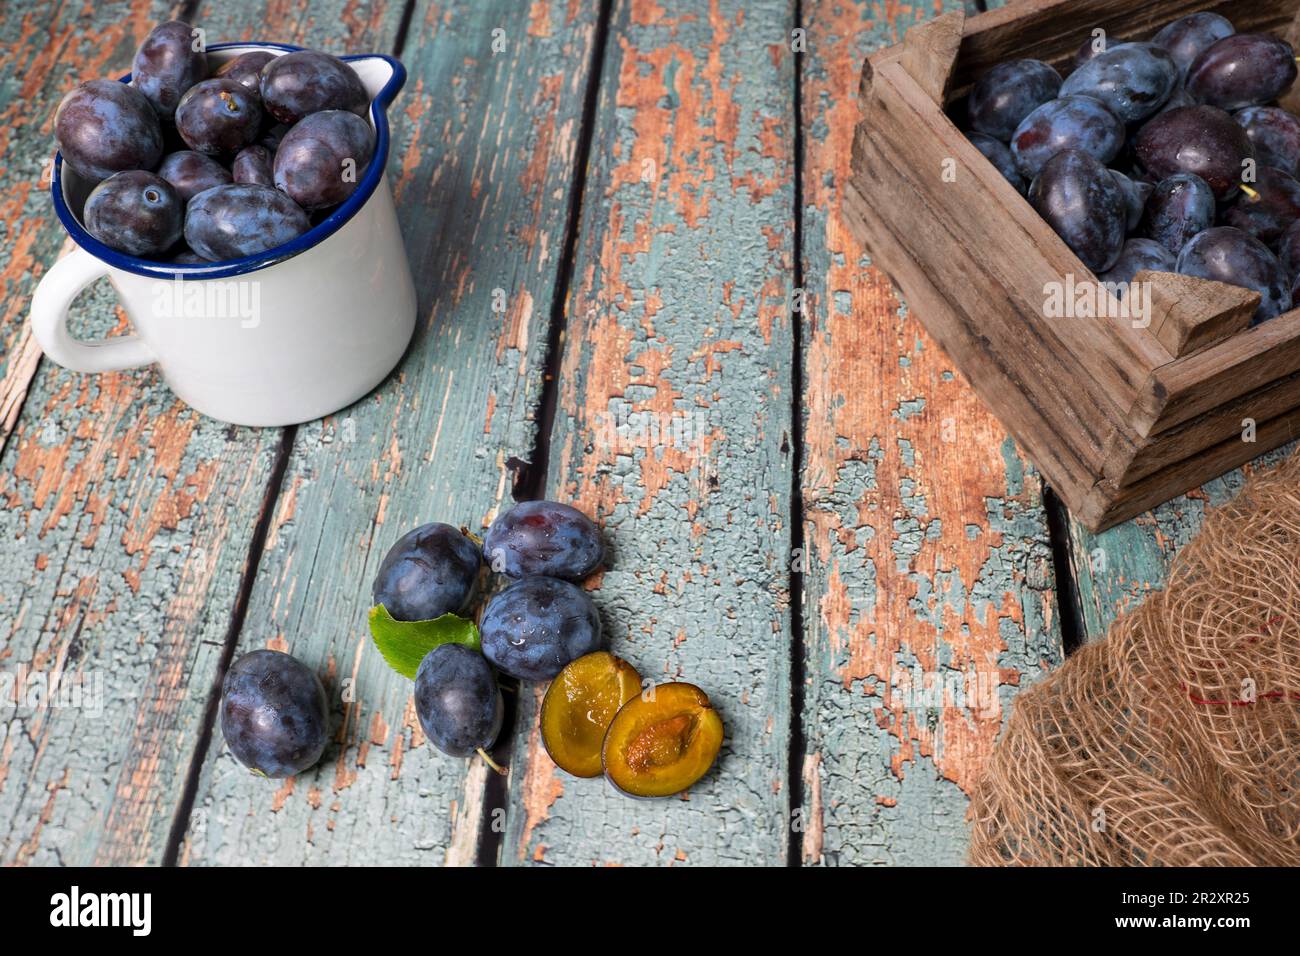 An enamel jug and a wooden box full of freshly harvested plums on old rustic wooden tabletop. A plum cut open. Stock Photo